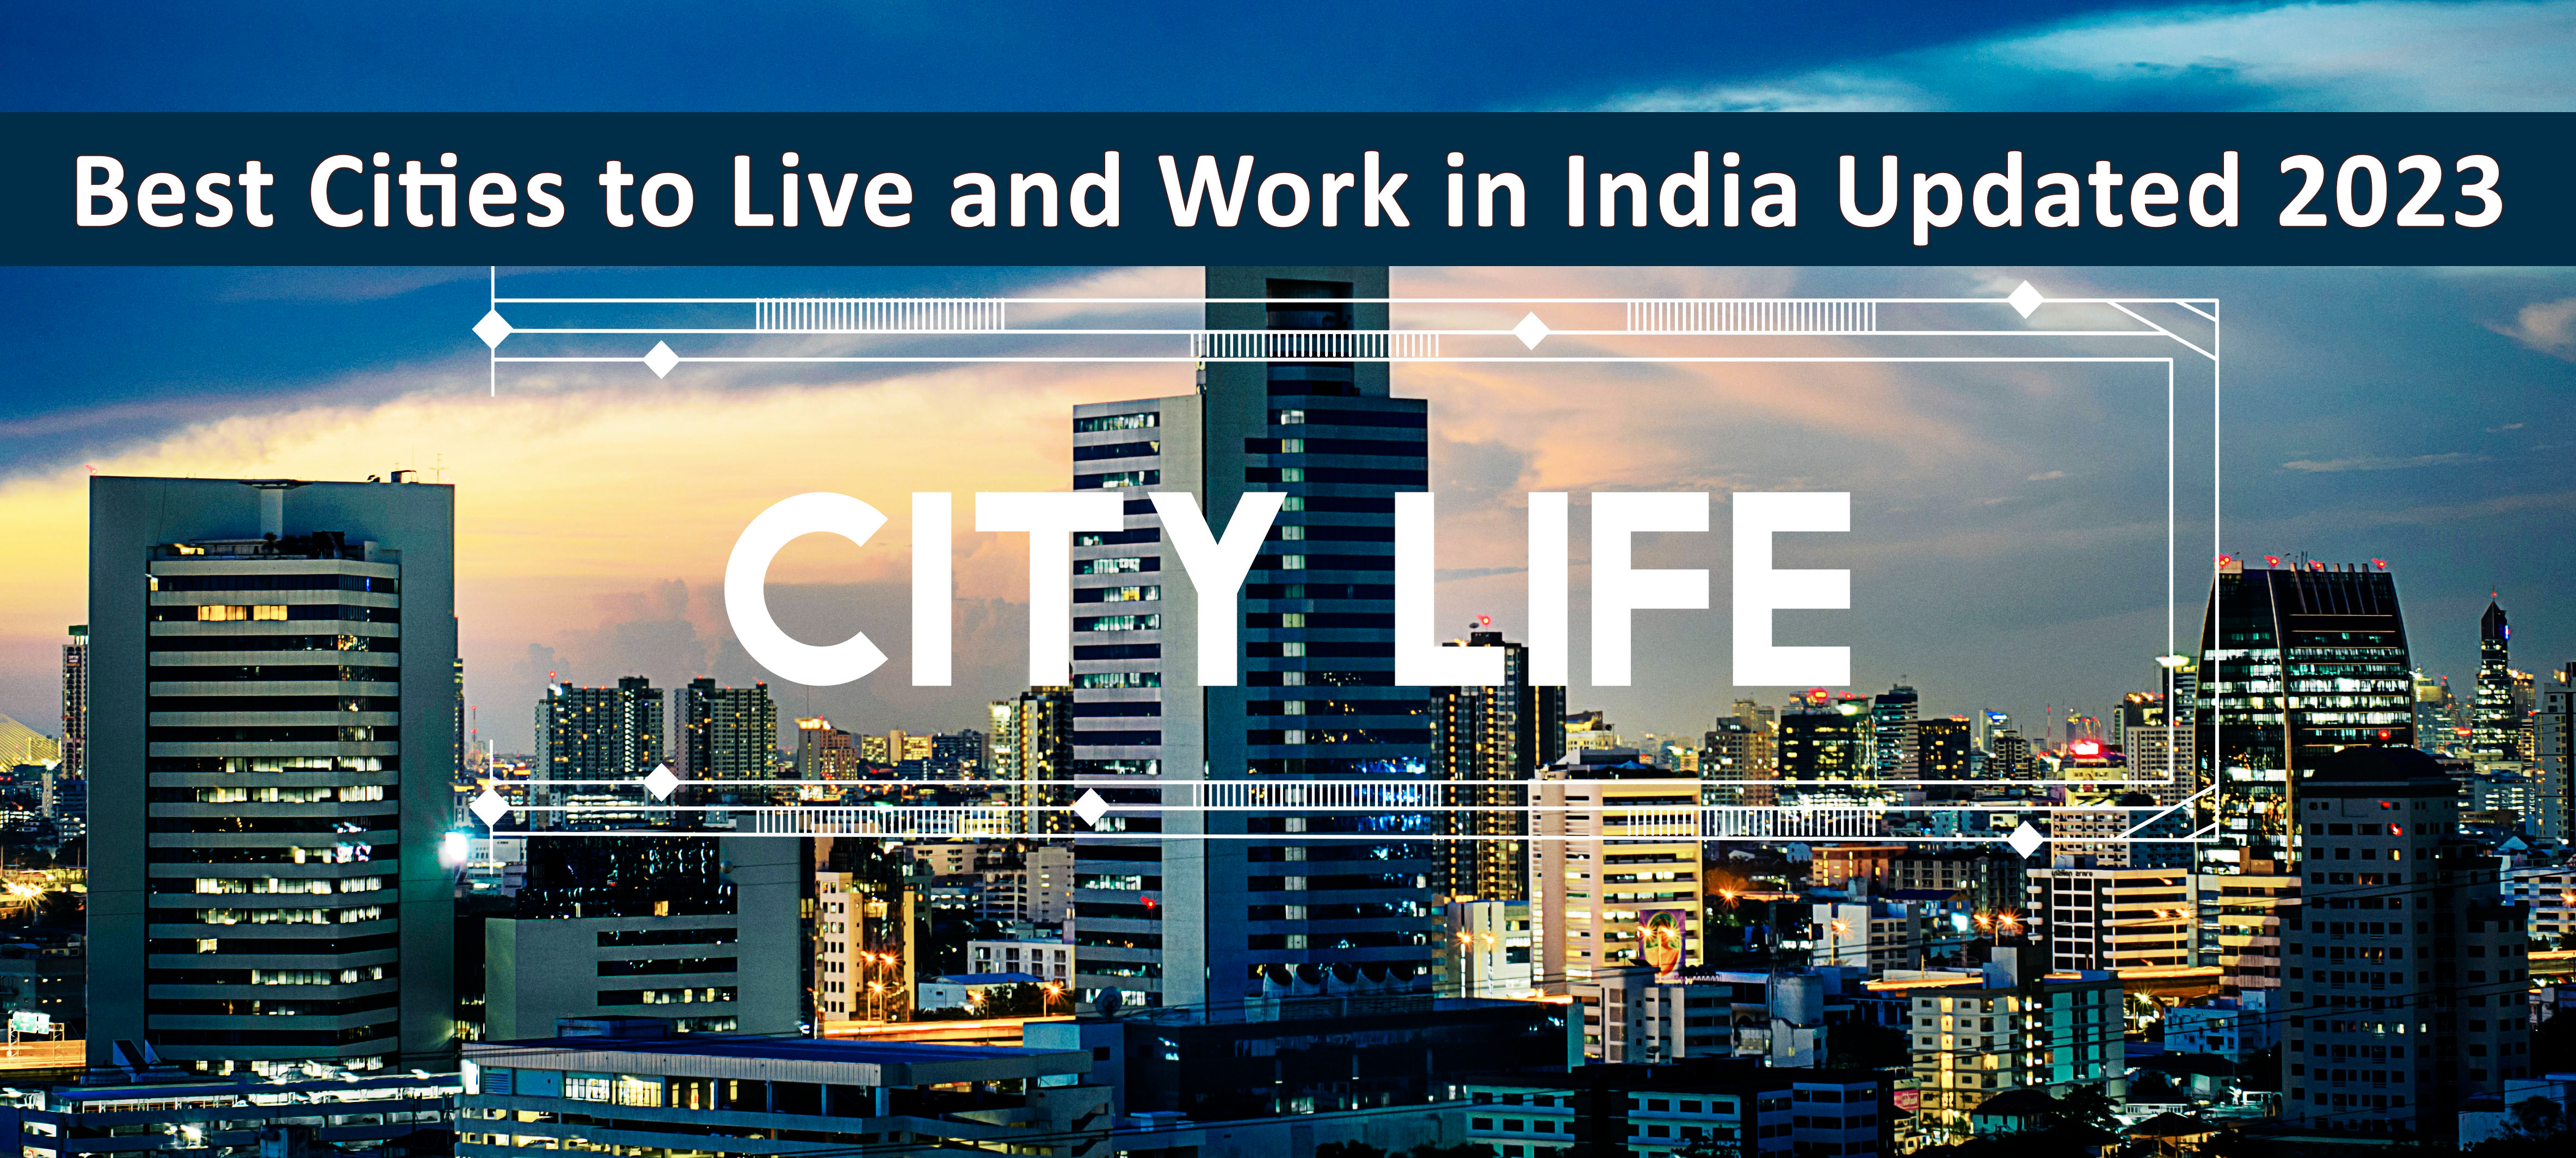 Best Cities to Live and Work in India Updated 2023